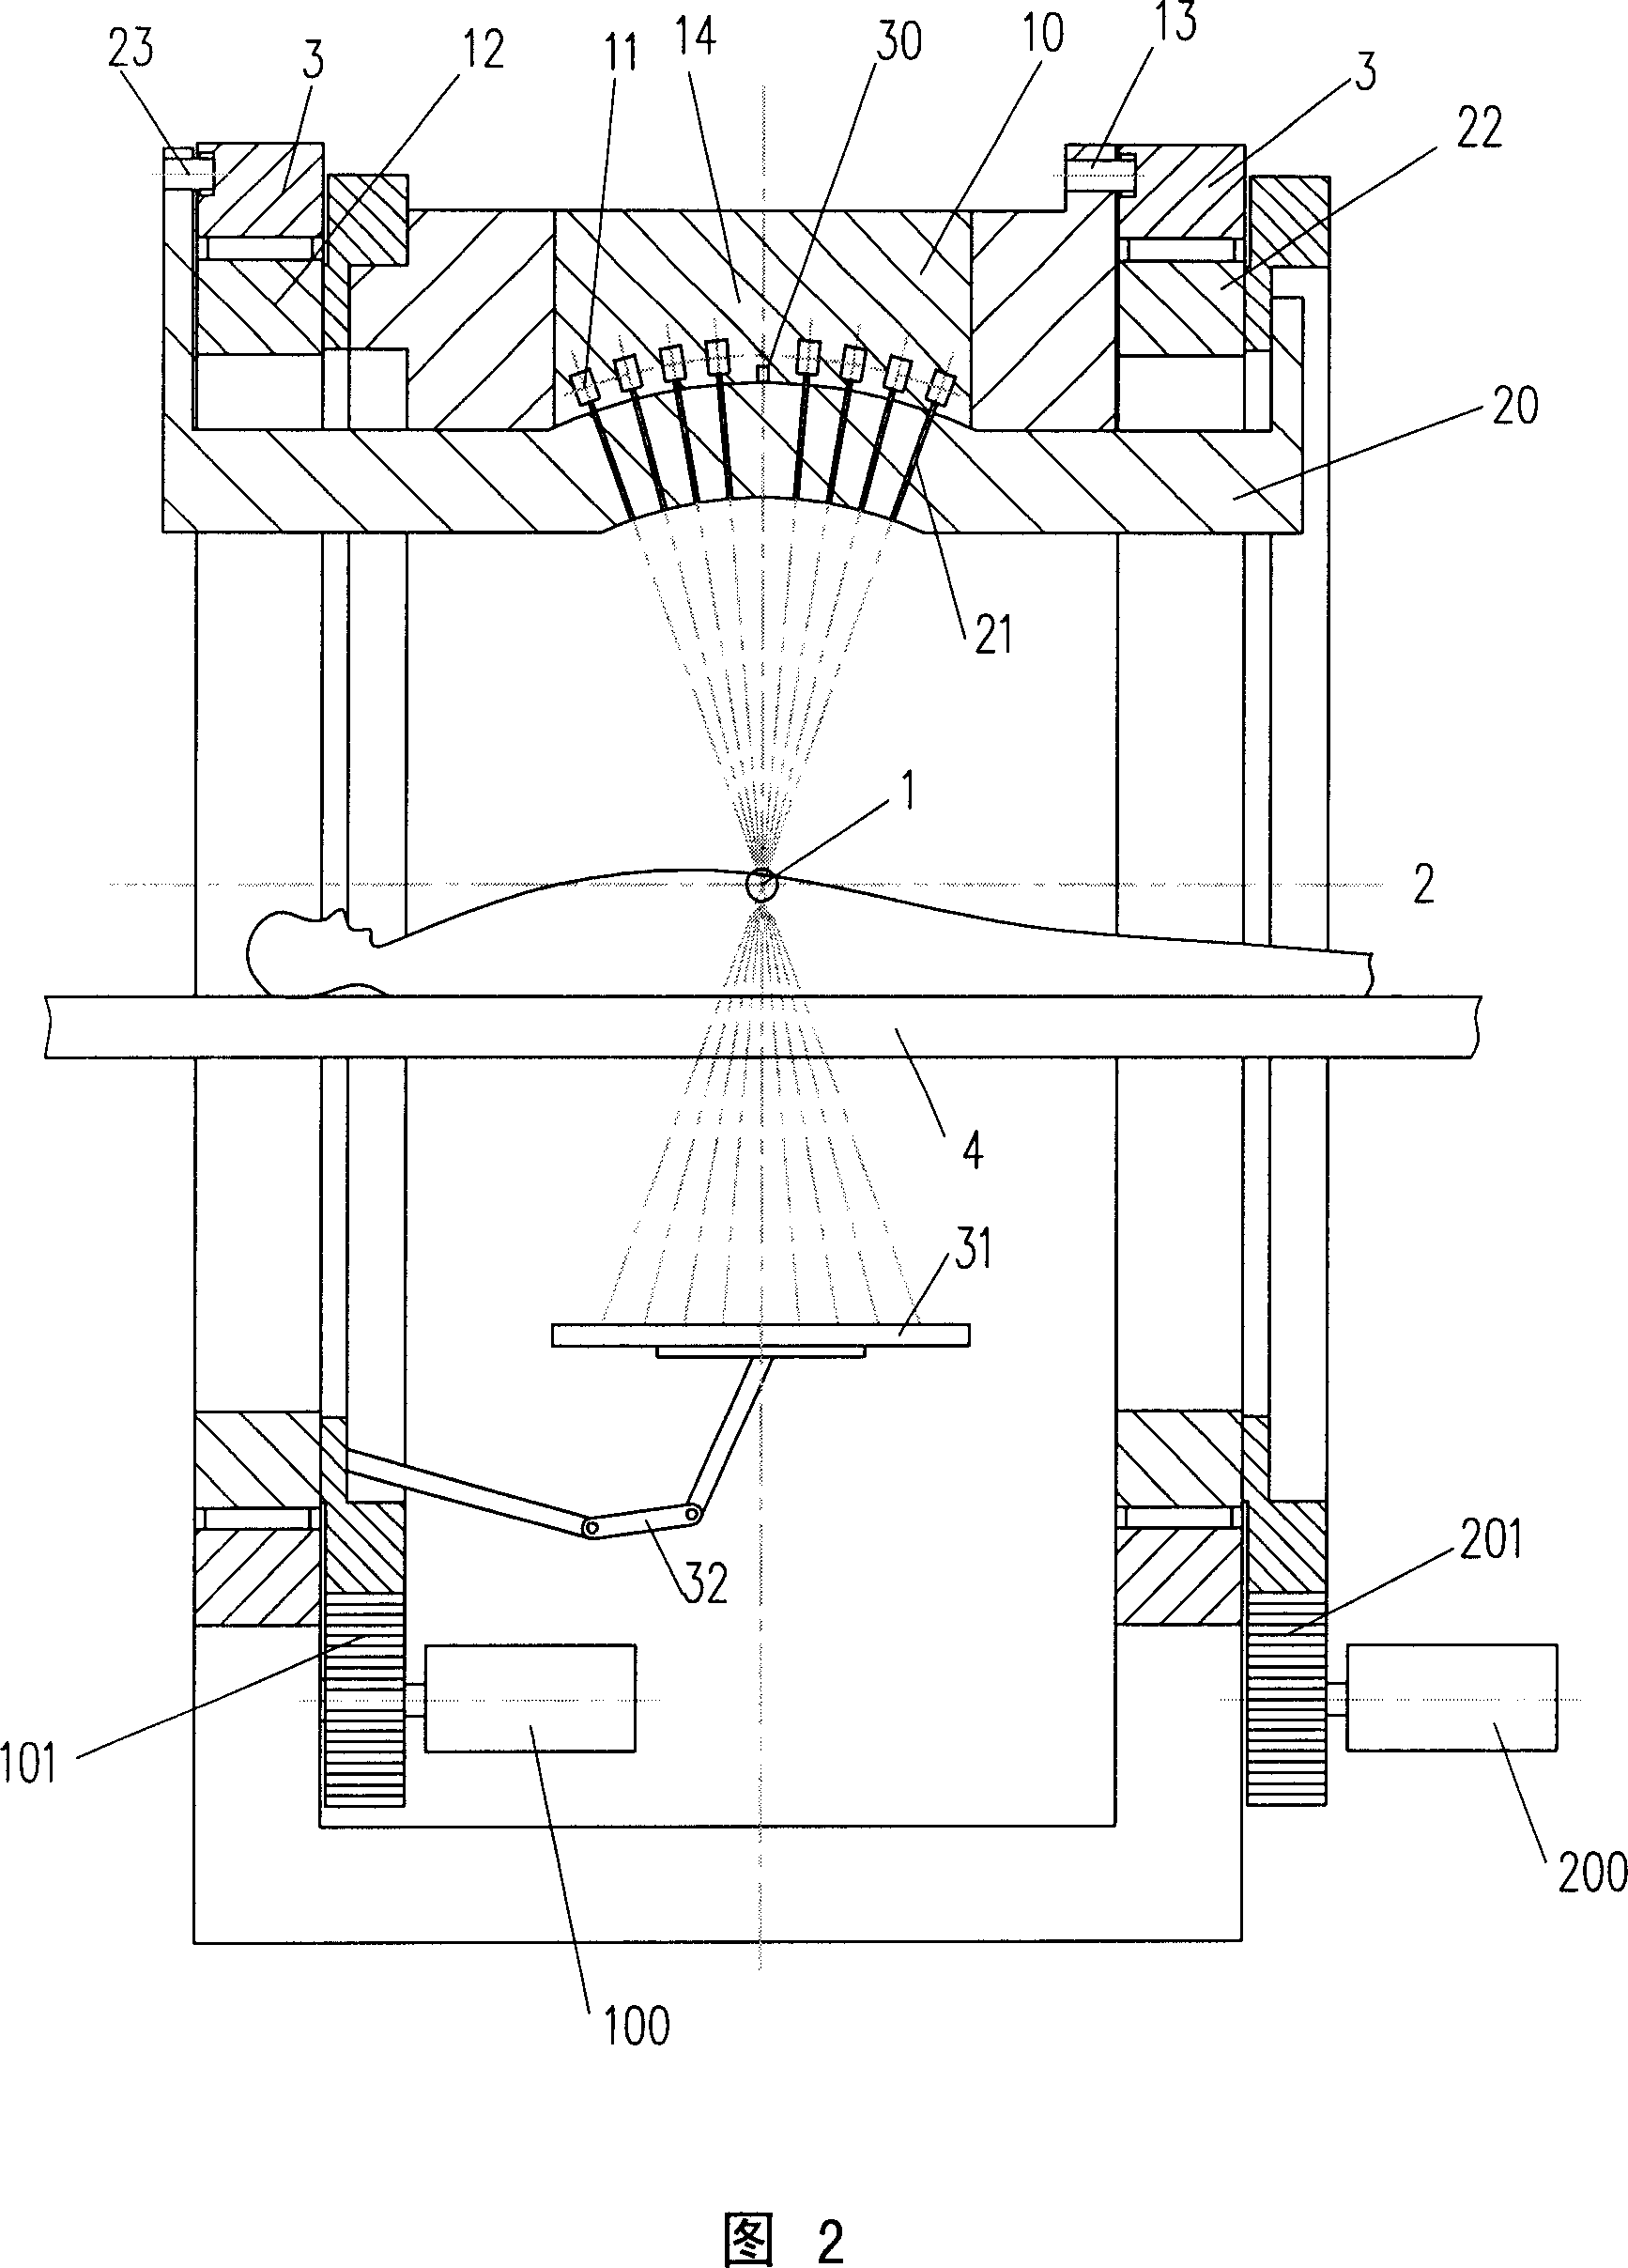 Radiation therapeutical irradiation device